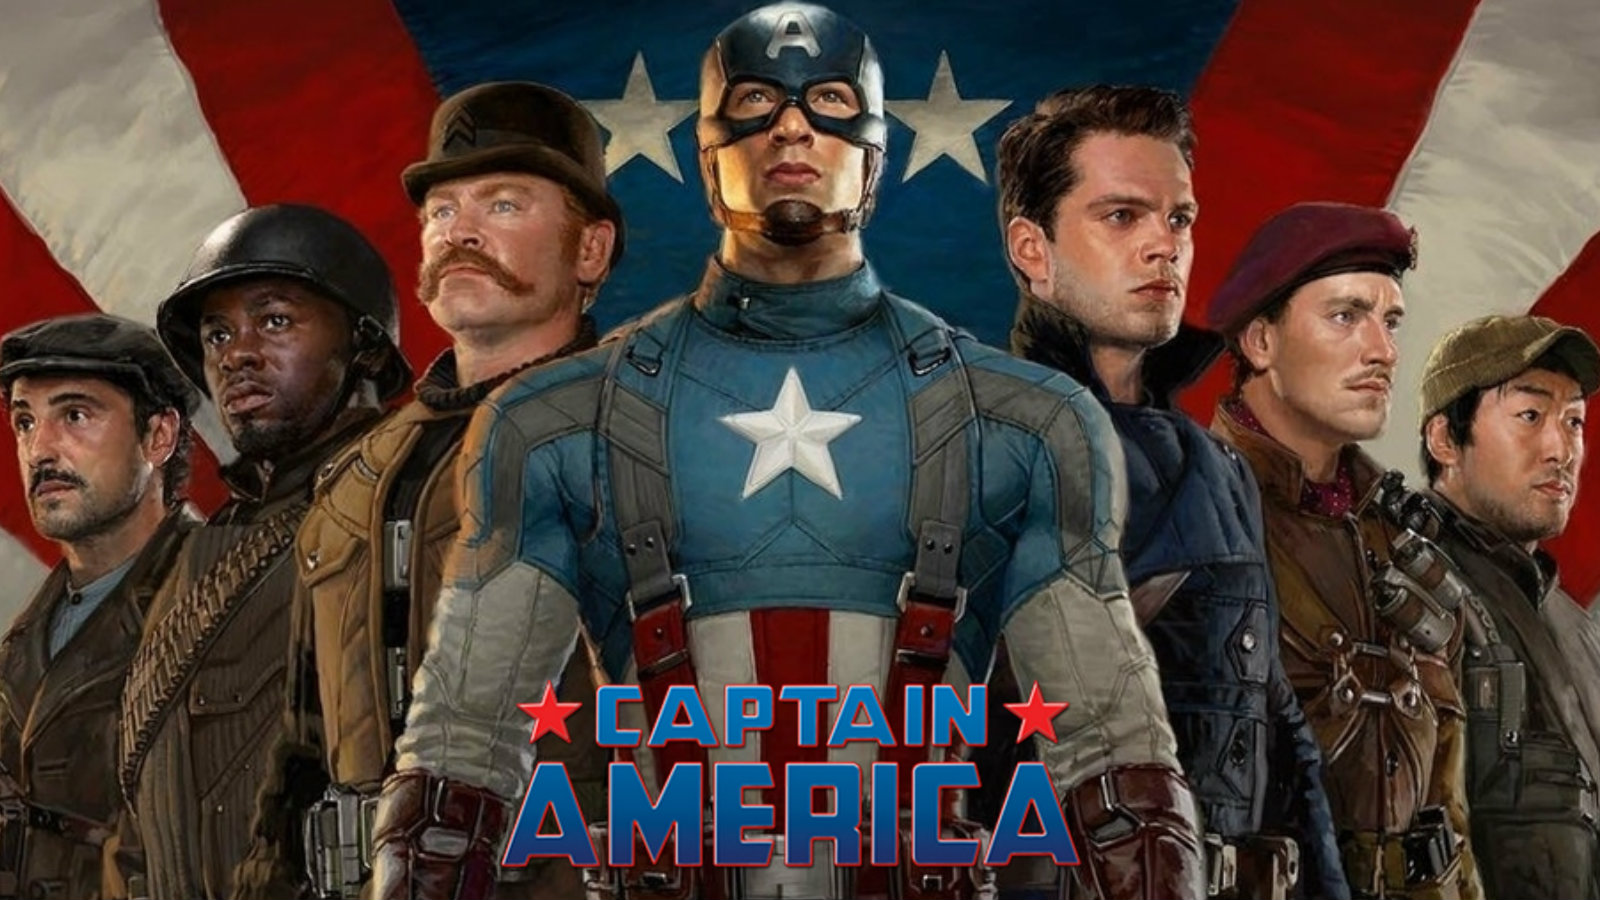 Captain America Image The First Avenger HD